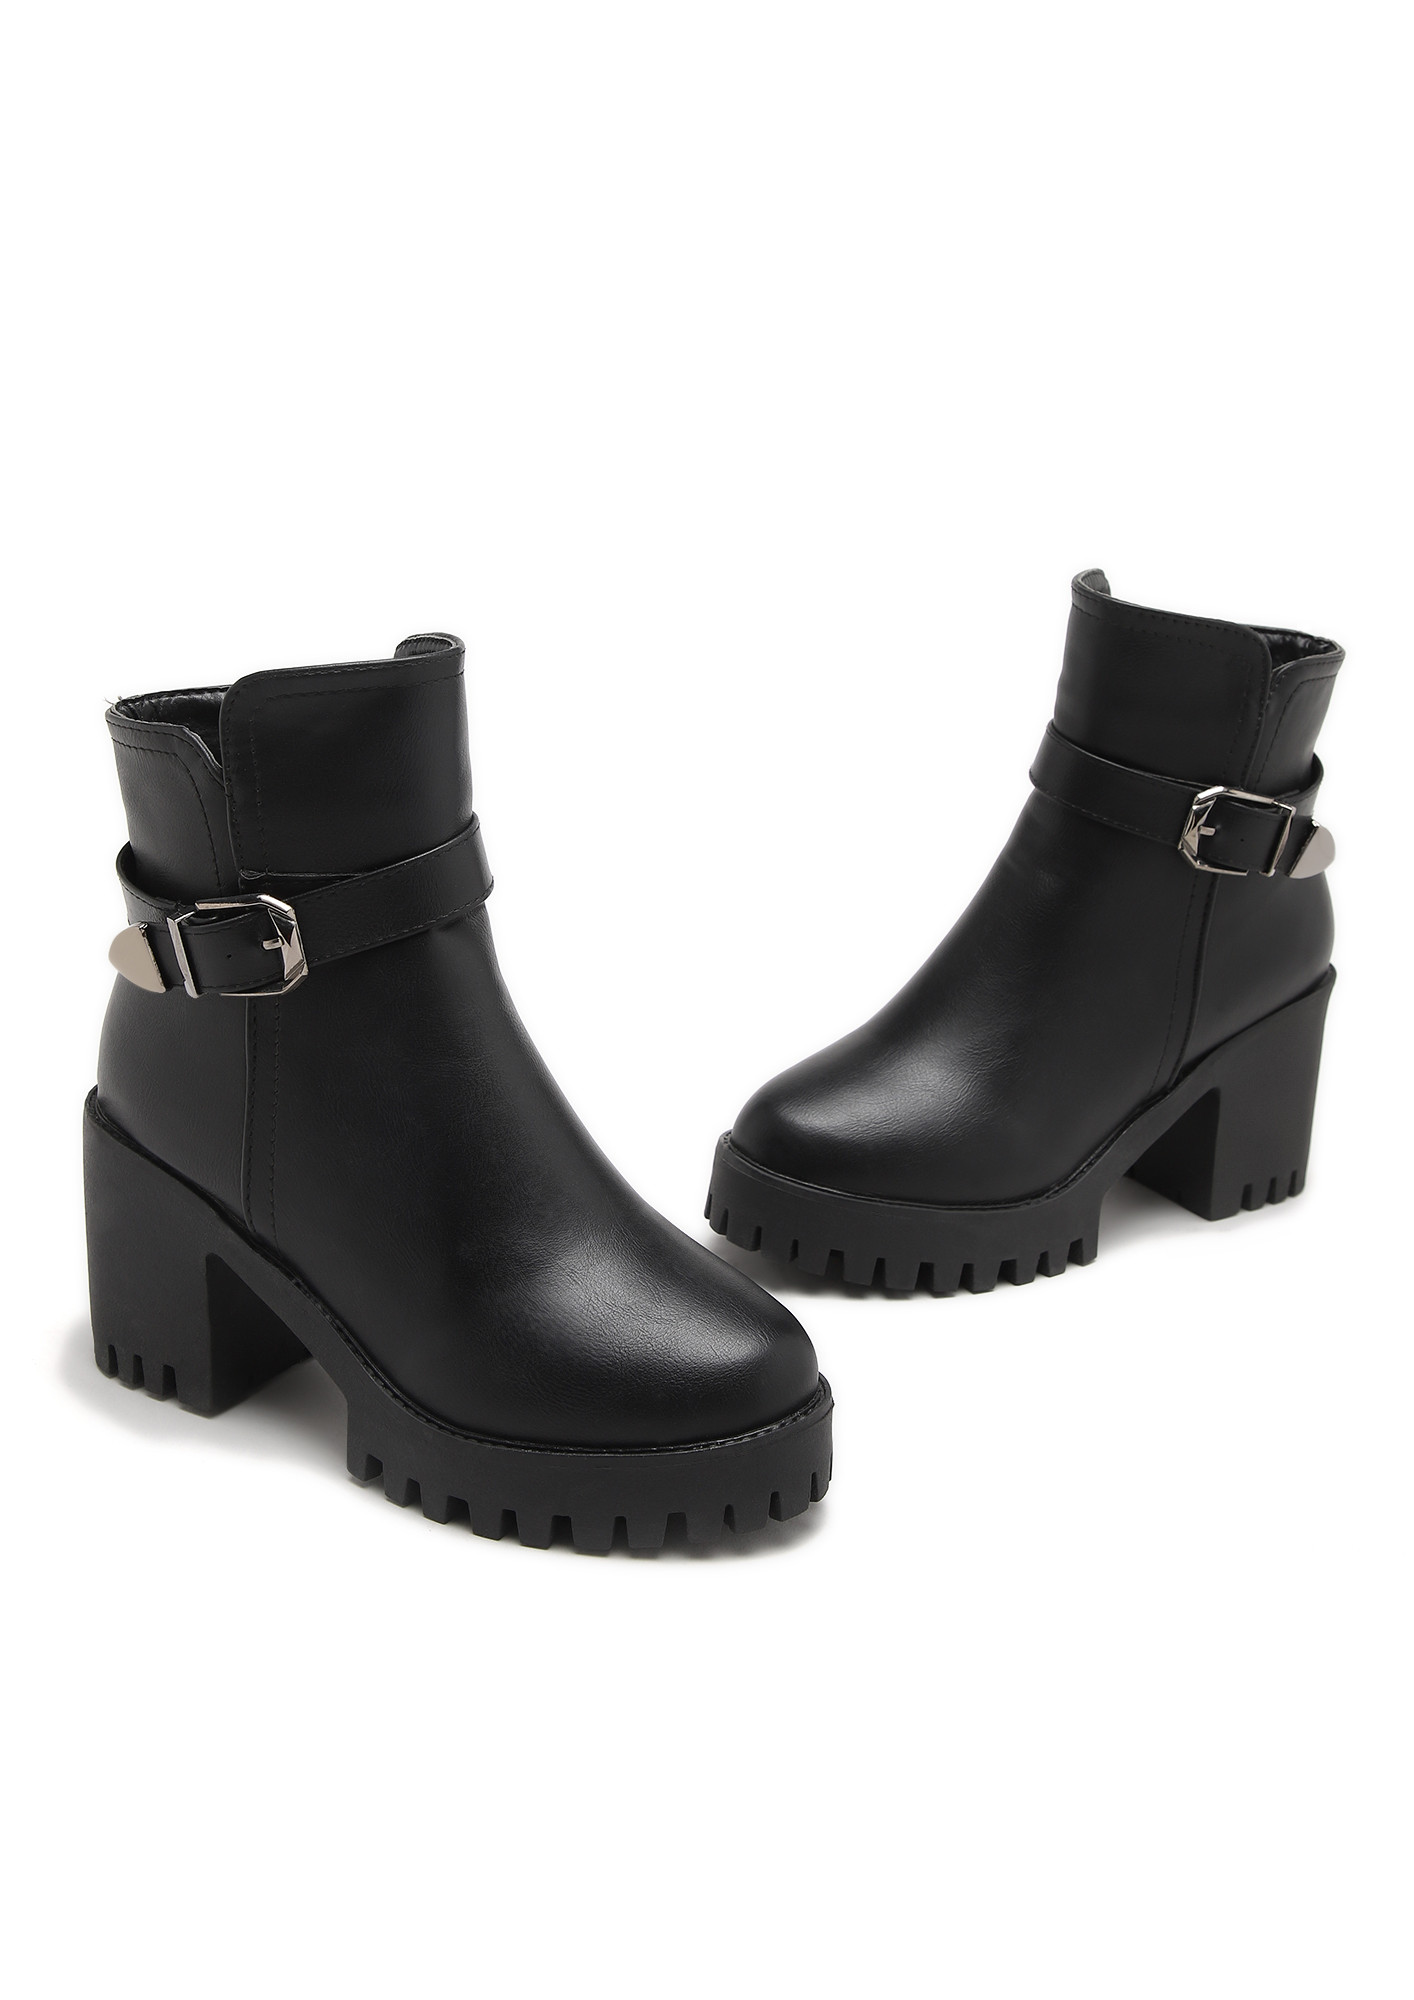 HOLY CHIC BLACK ANKLE BOOTS